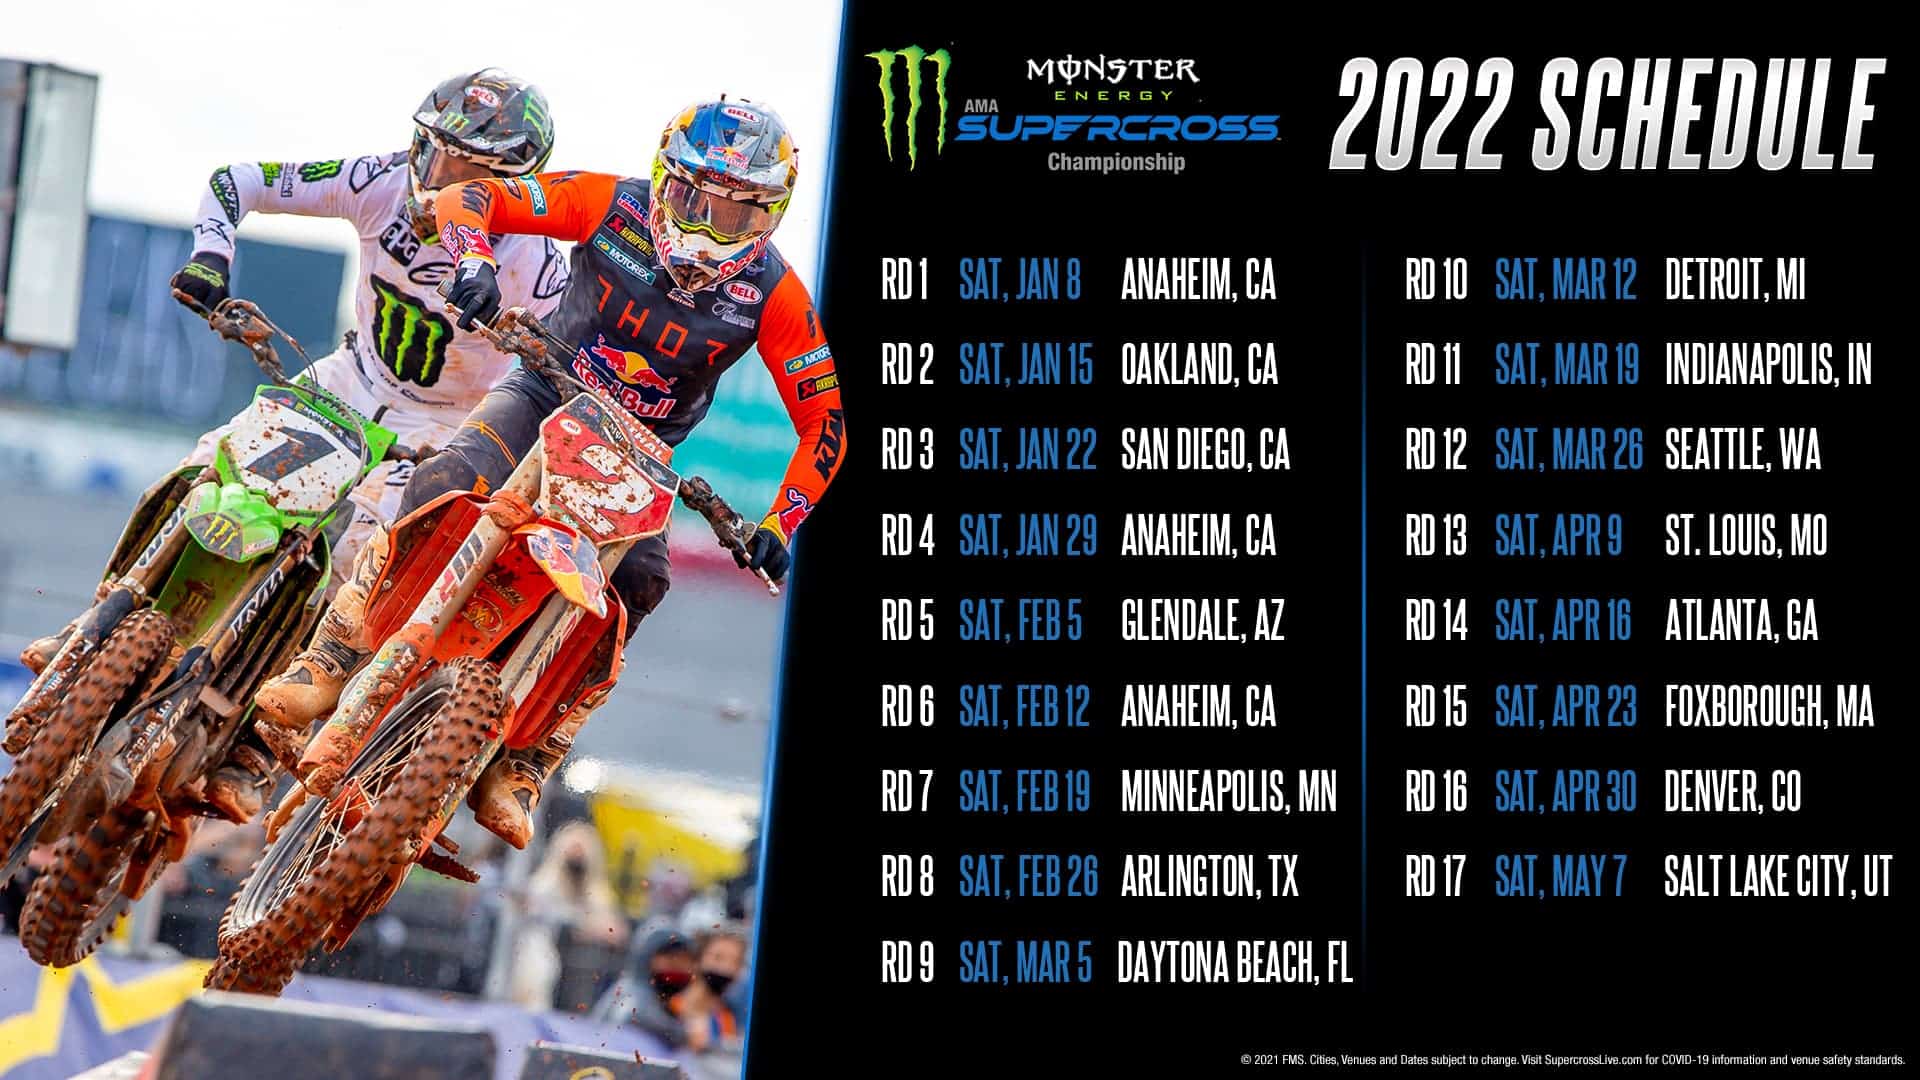 The 2022 monster energy ama supercross championship schedule has been released.